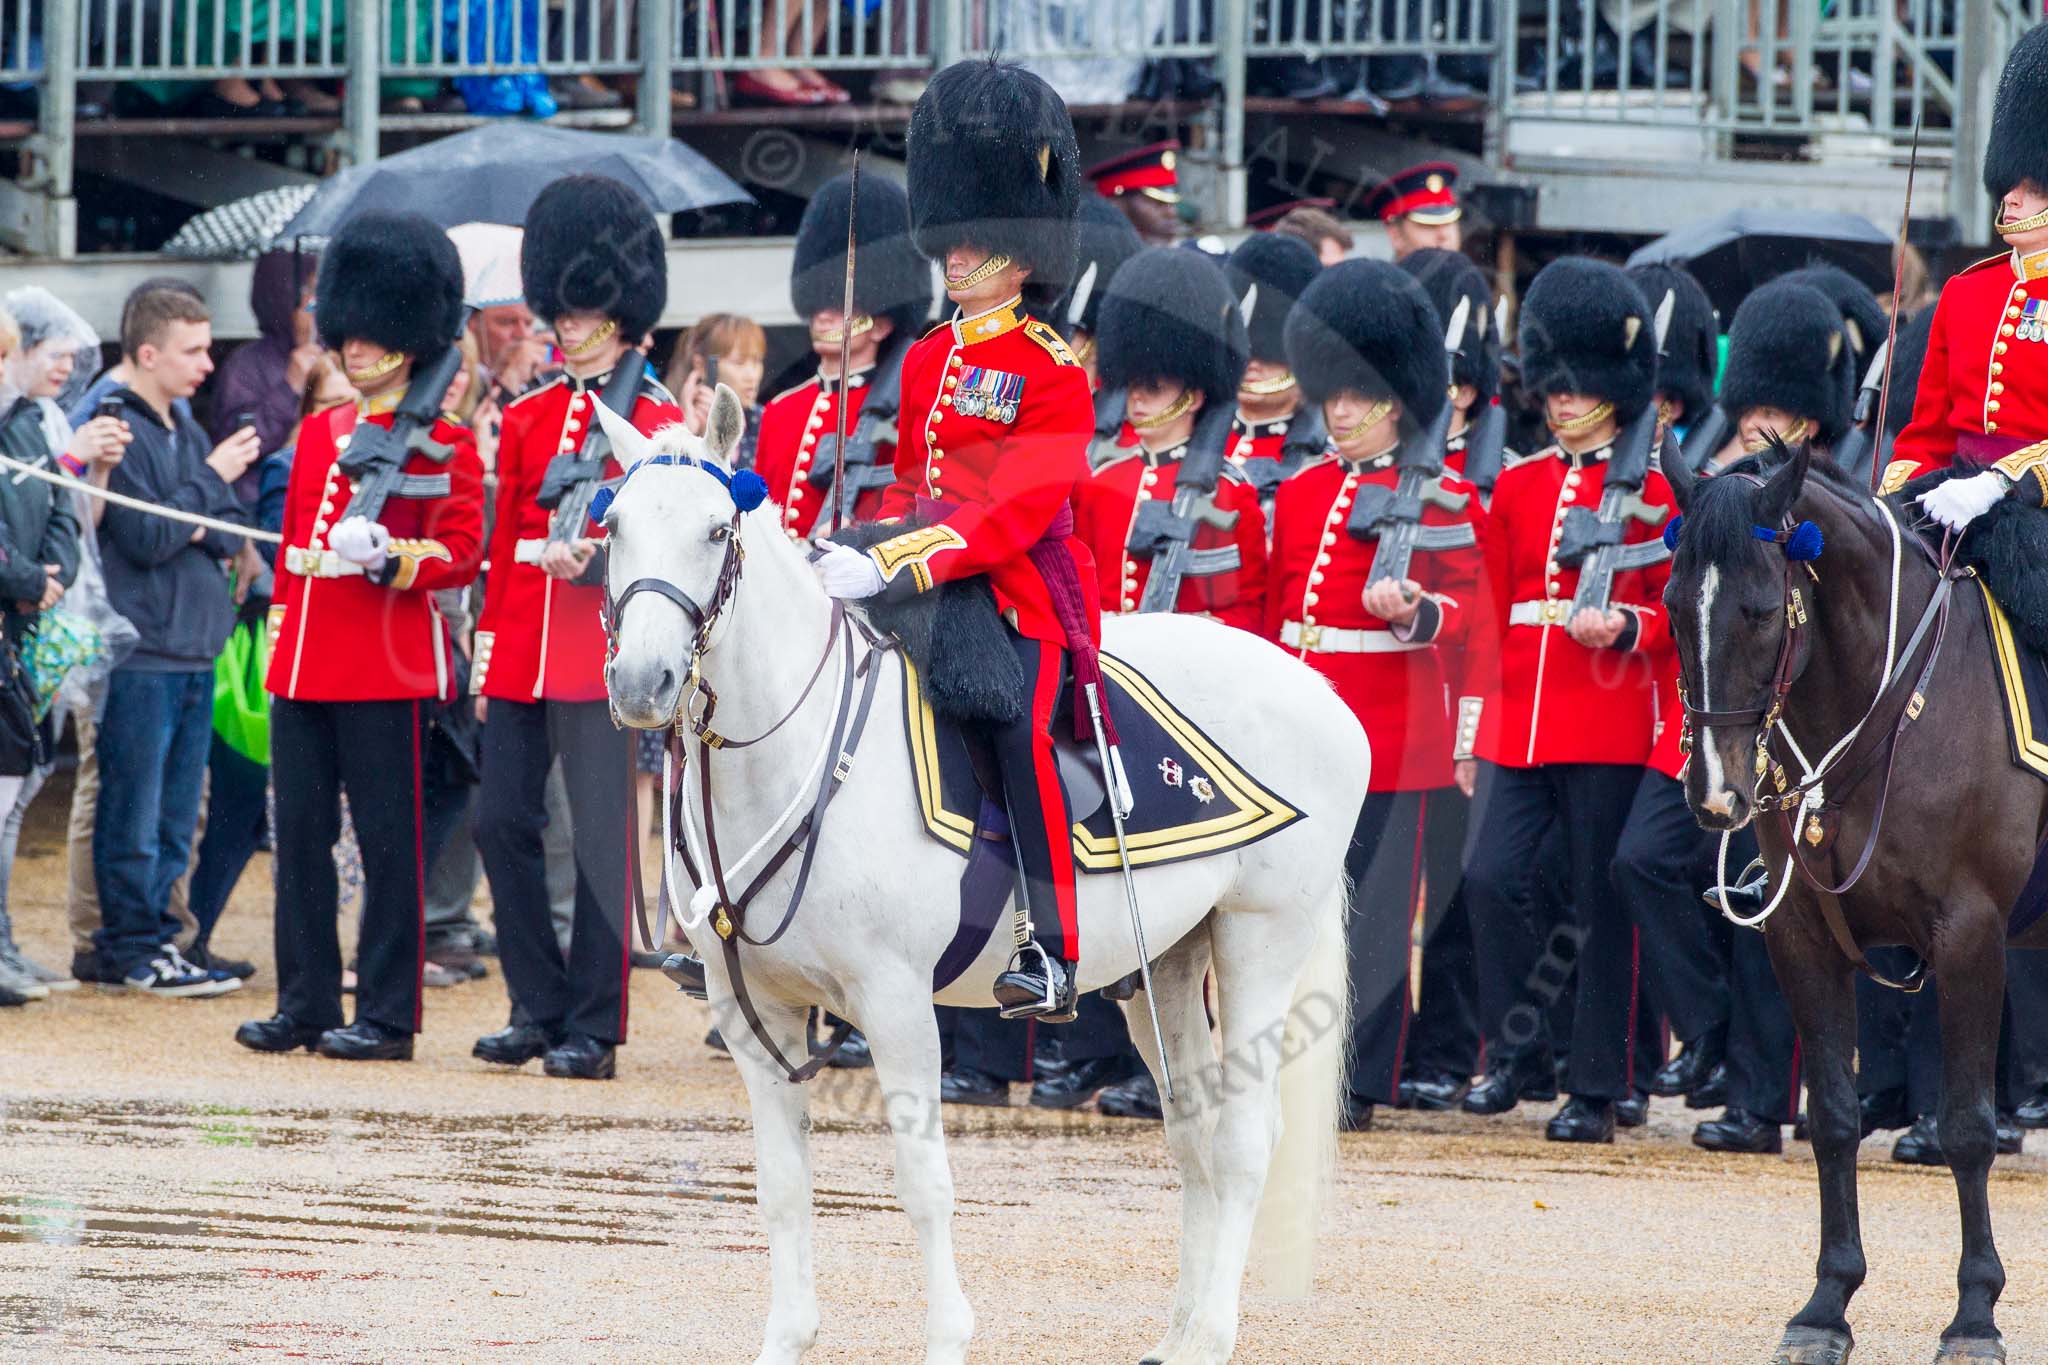 The Colonel's Review 2014.
Horse Guards Parade, Westminster,
London,

United Kingdom,
on 07 June 2014 at 11:32, image #467